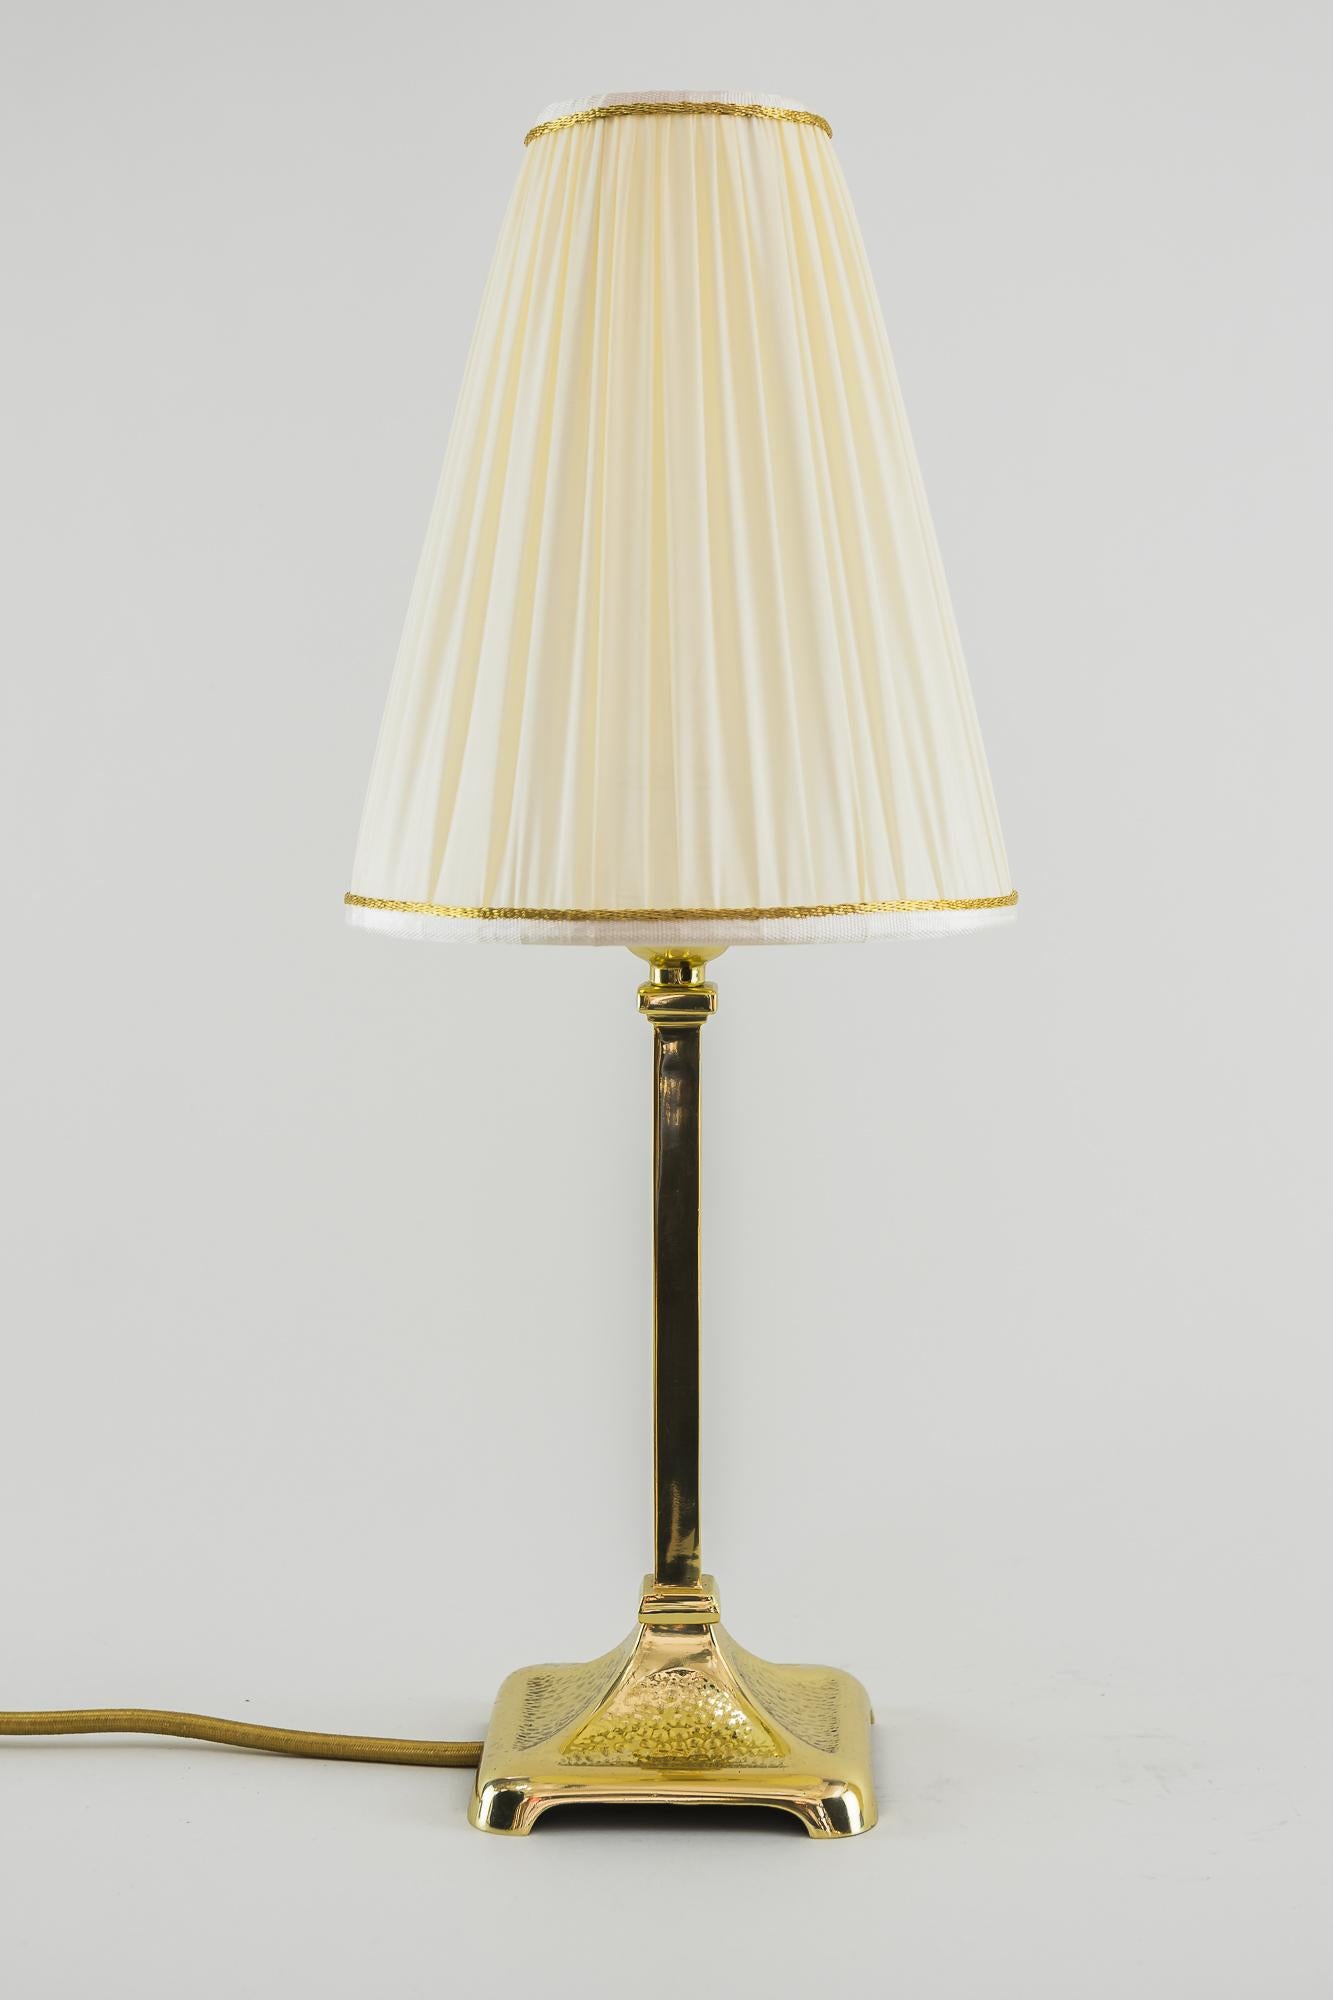 Art Deco table lamp, Vienna, 1920s 
Brass hammered 
Polished and stove enameled
Shade replaced ( New ).